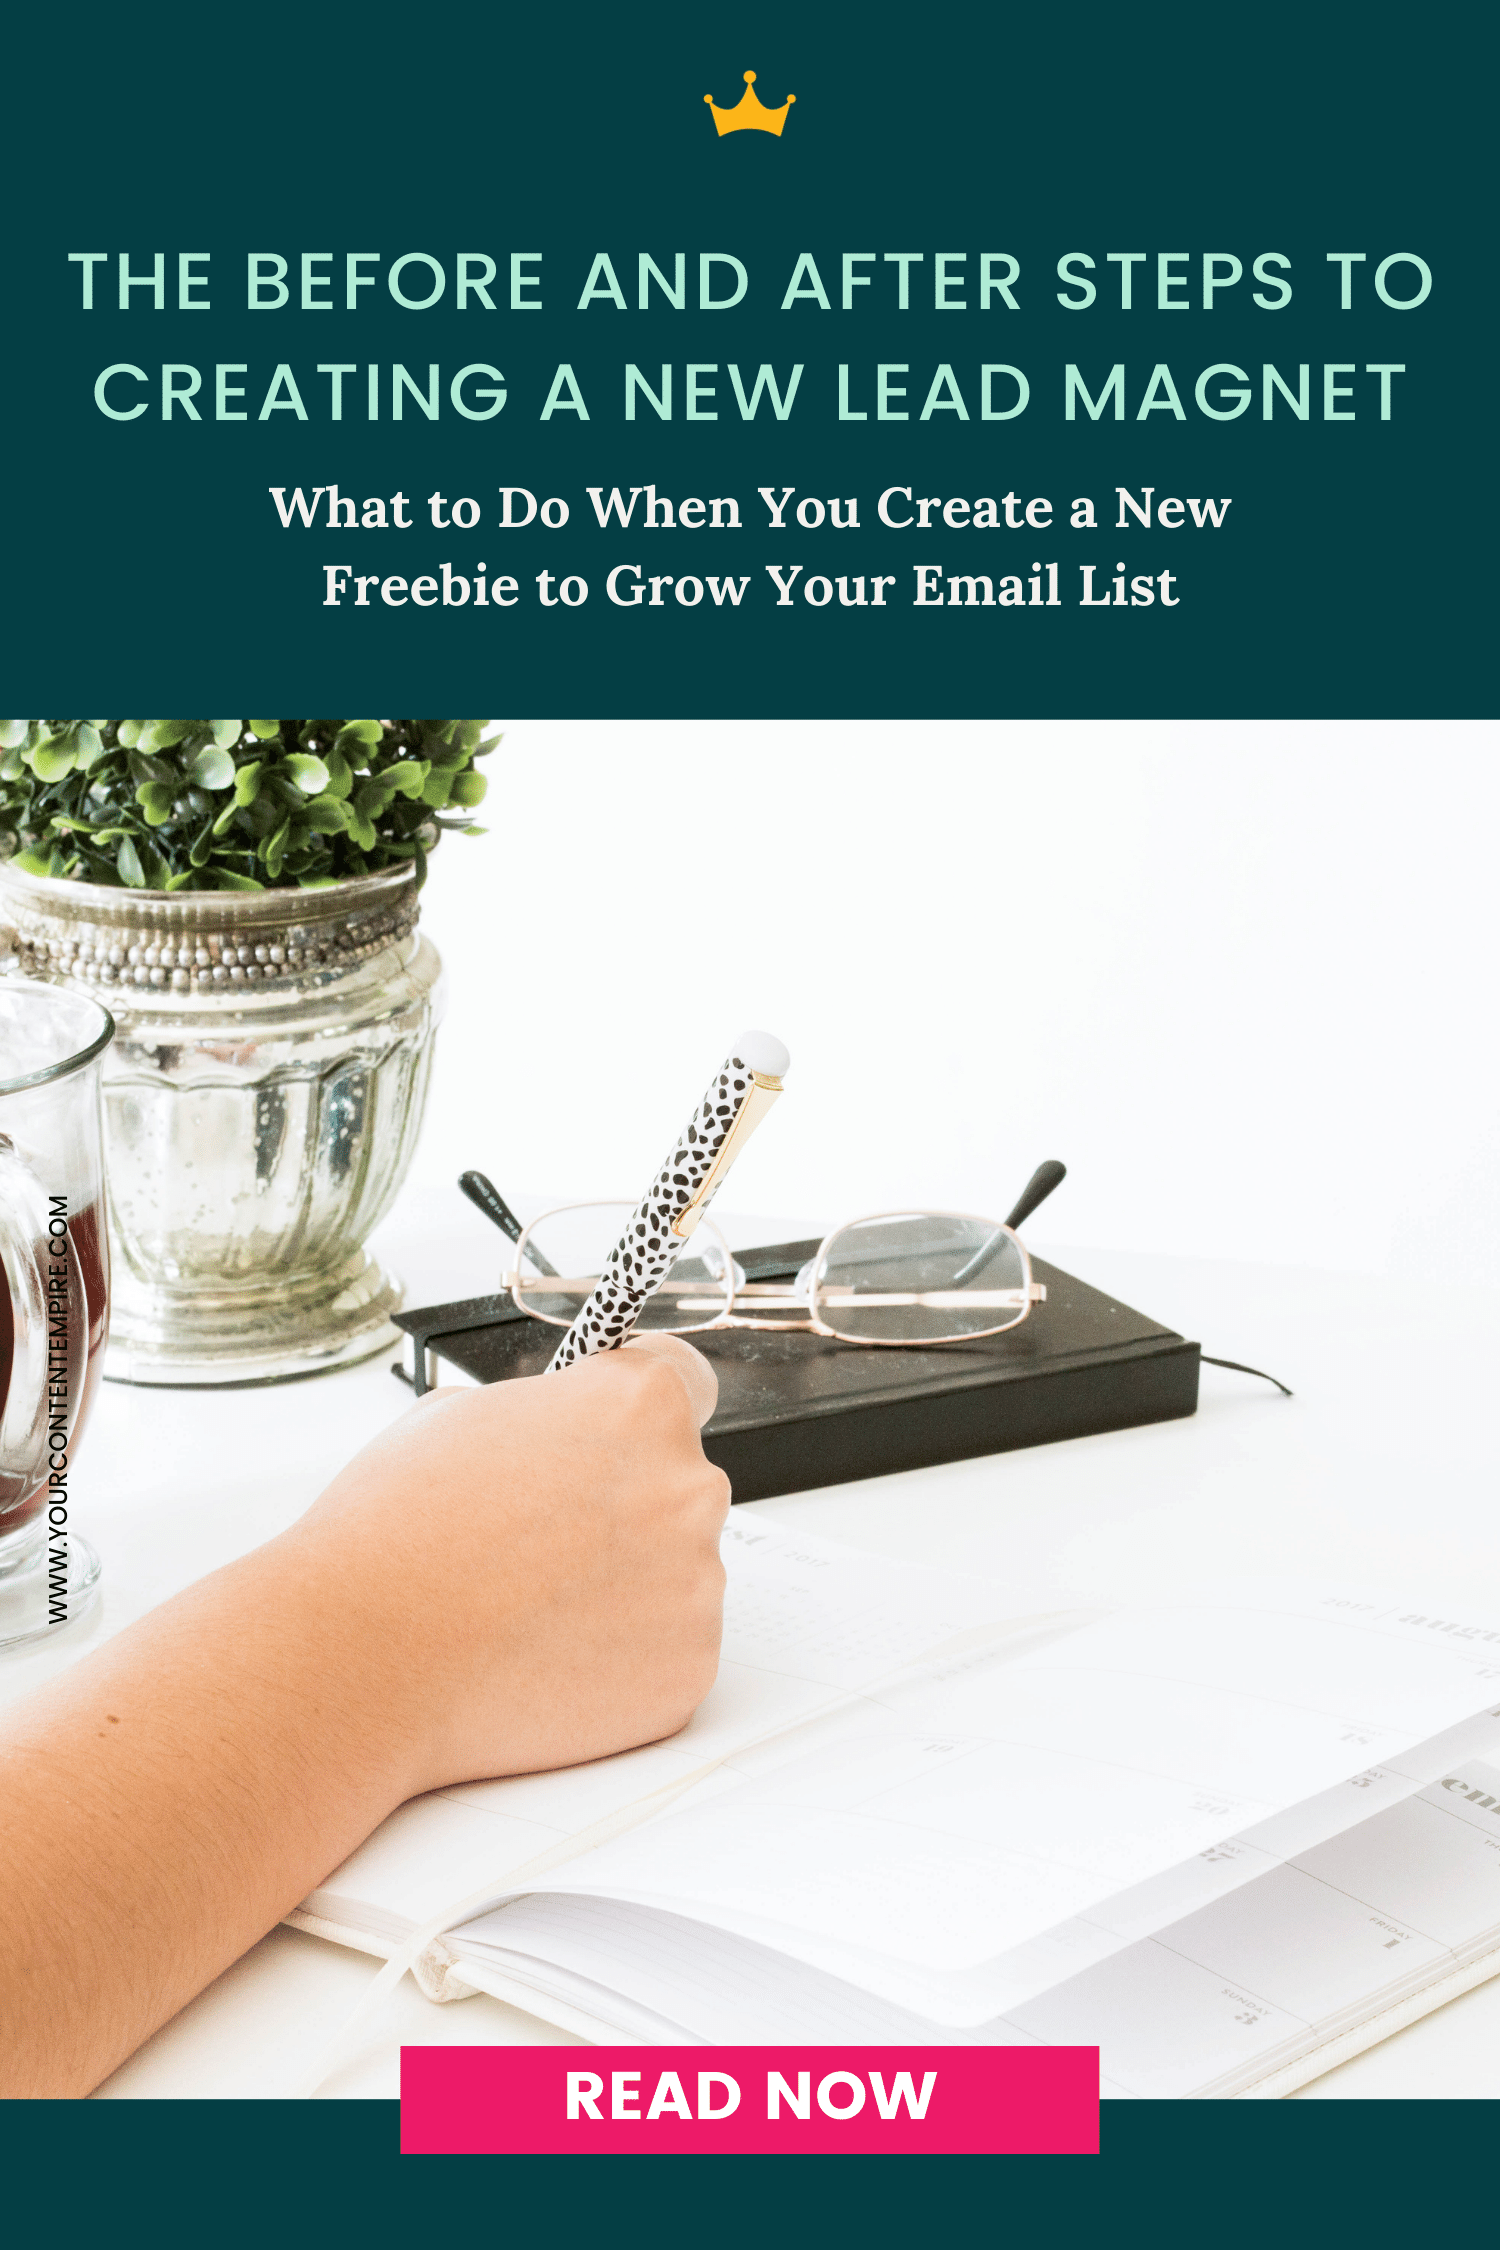 The Before and After Steps to Creating a New Lead Magnet